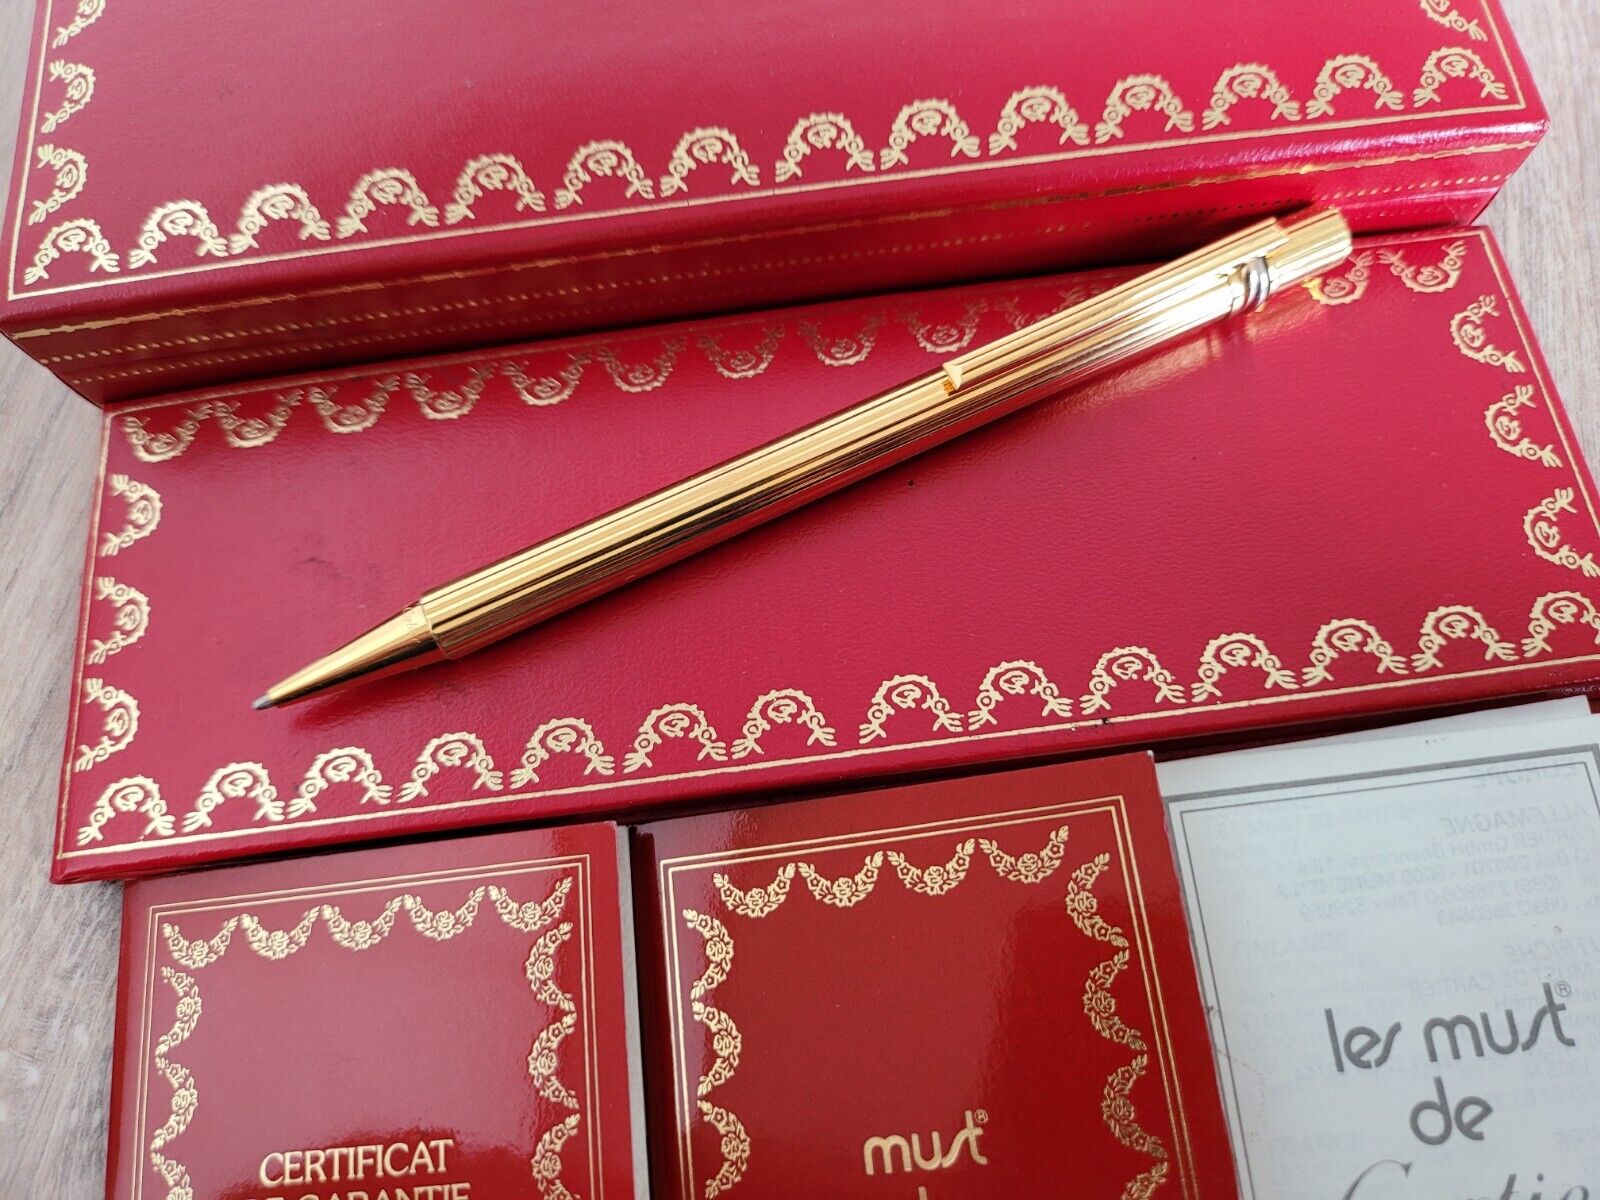 Must de Cartier Trinity Gold Plated Ballpoint Pen Made in France - AUTHENTIC 